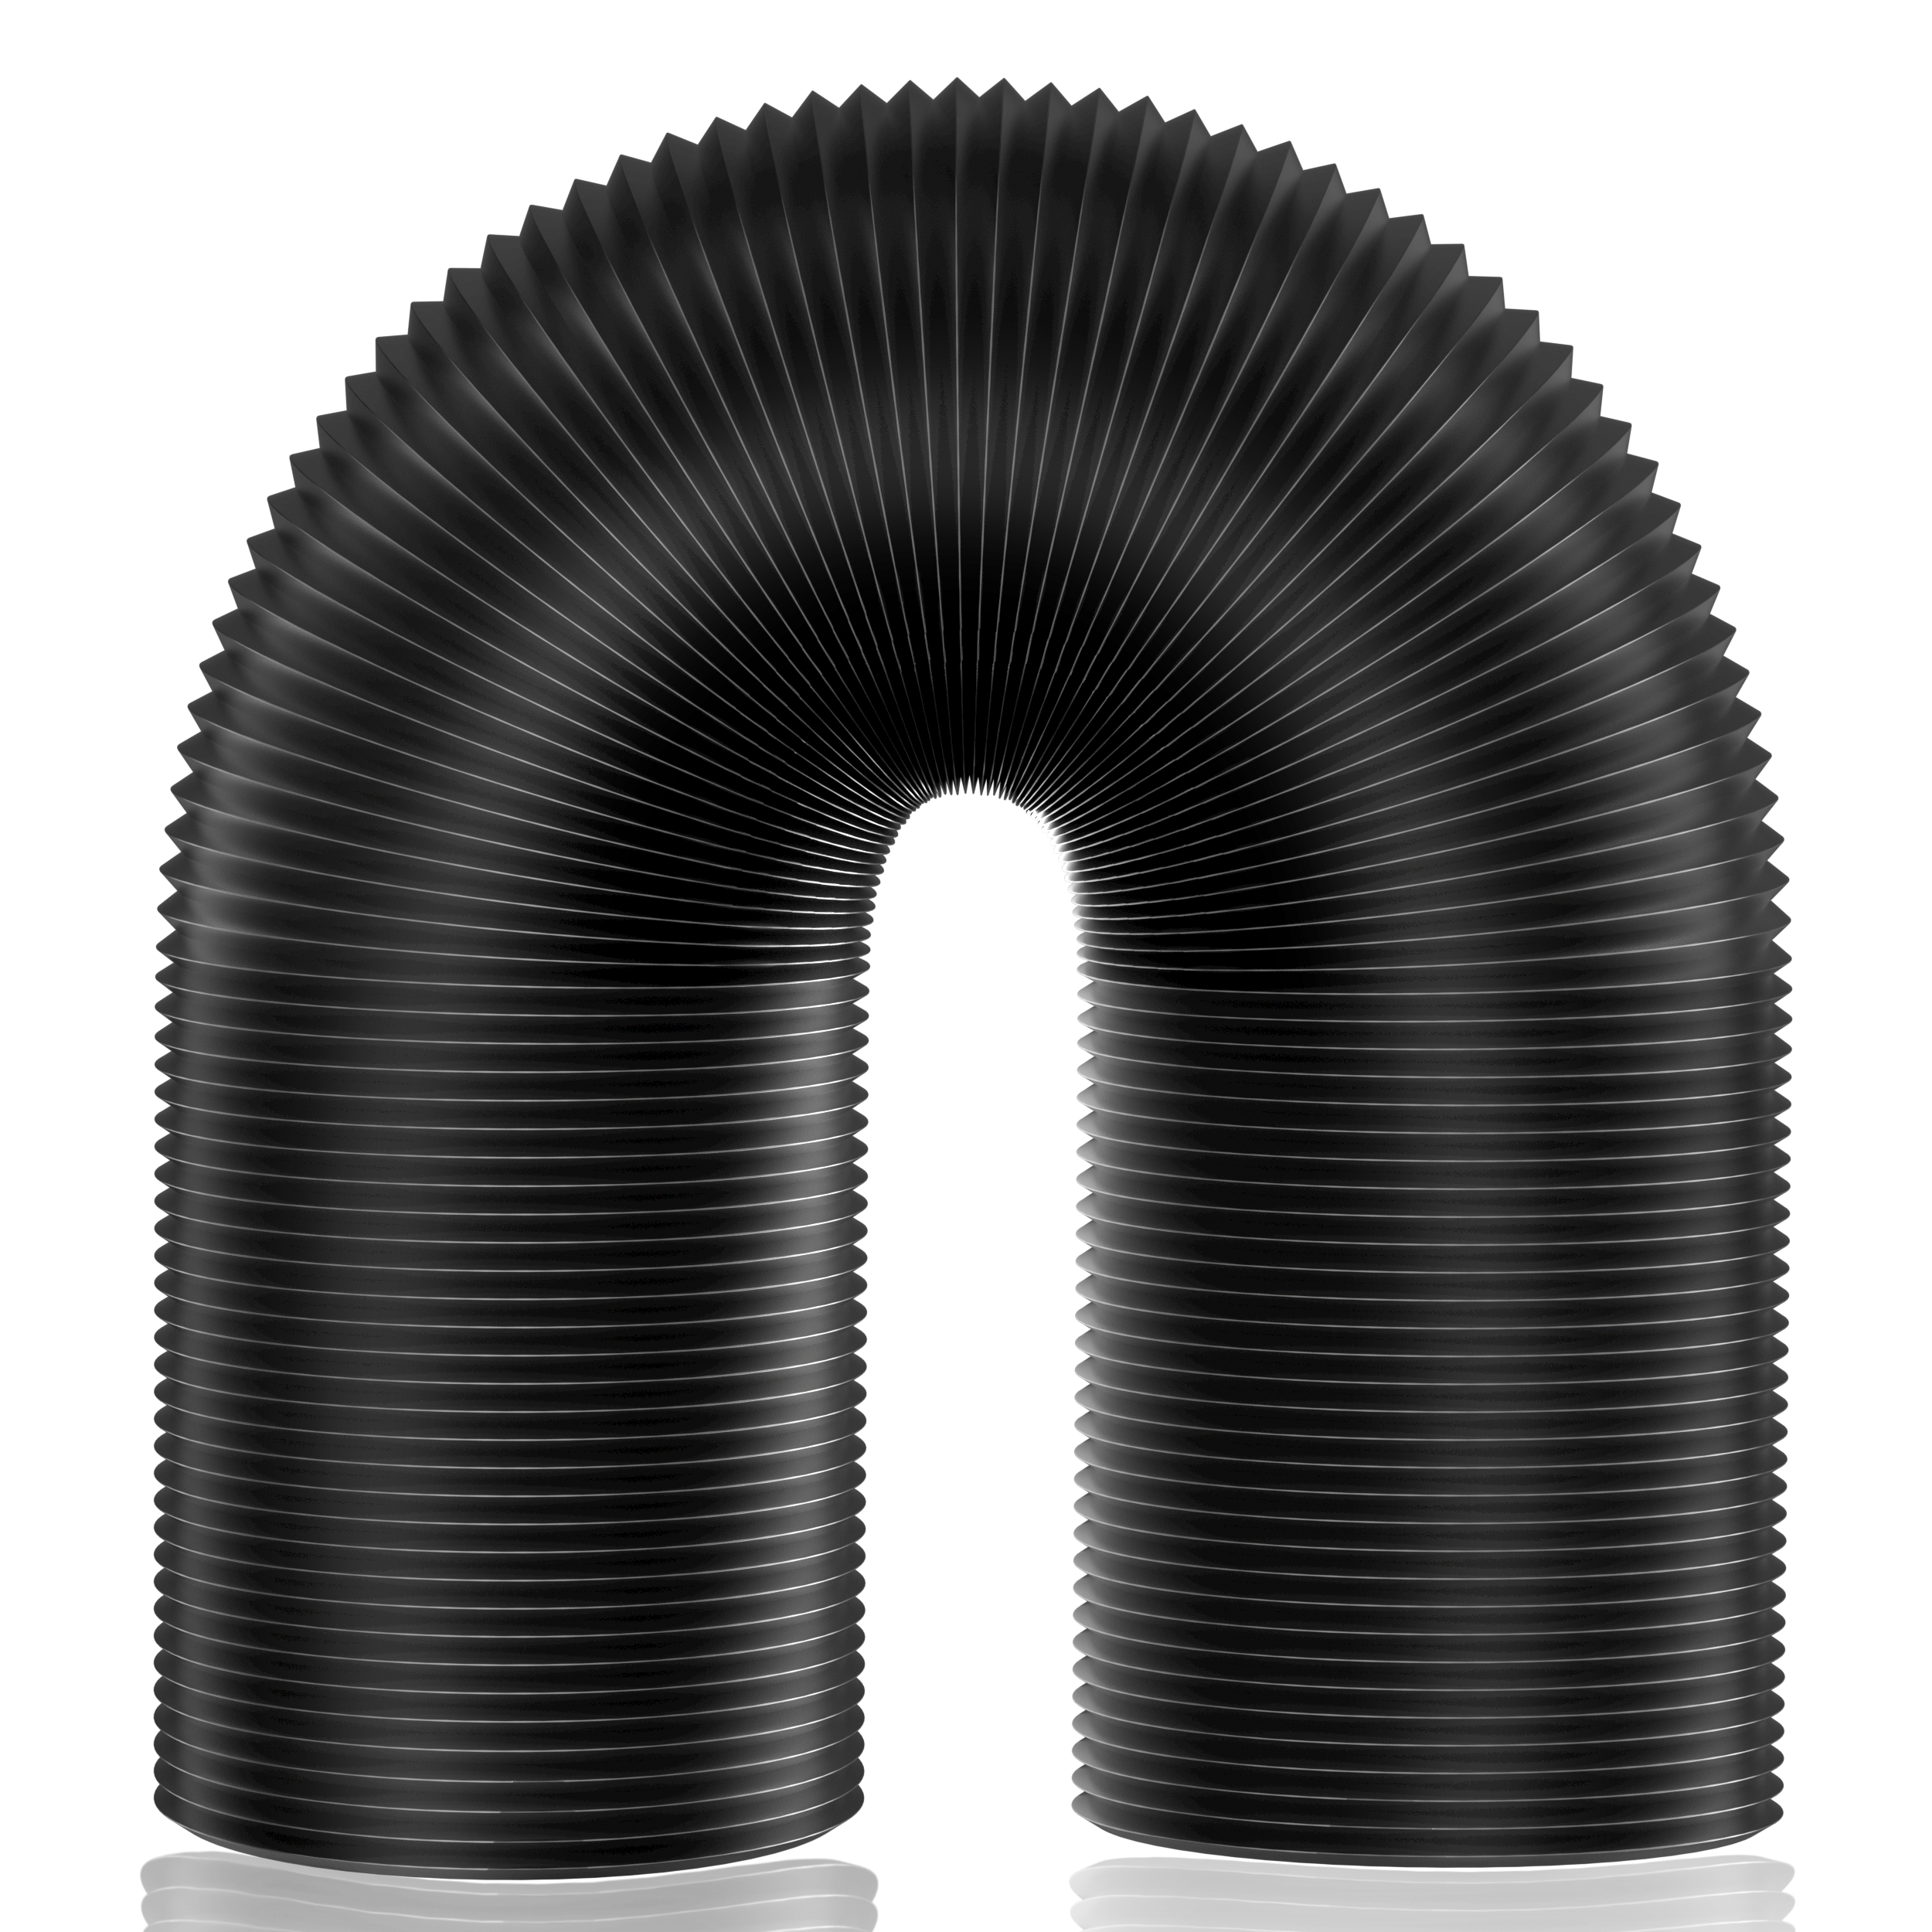 Black Heavy-Duty Four-Layer Protection Dryer Vent Hose for Heating Cooling Ventilation and Exhaust